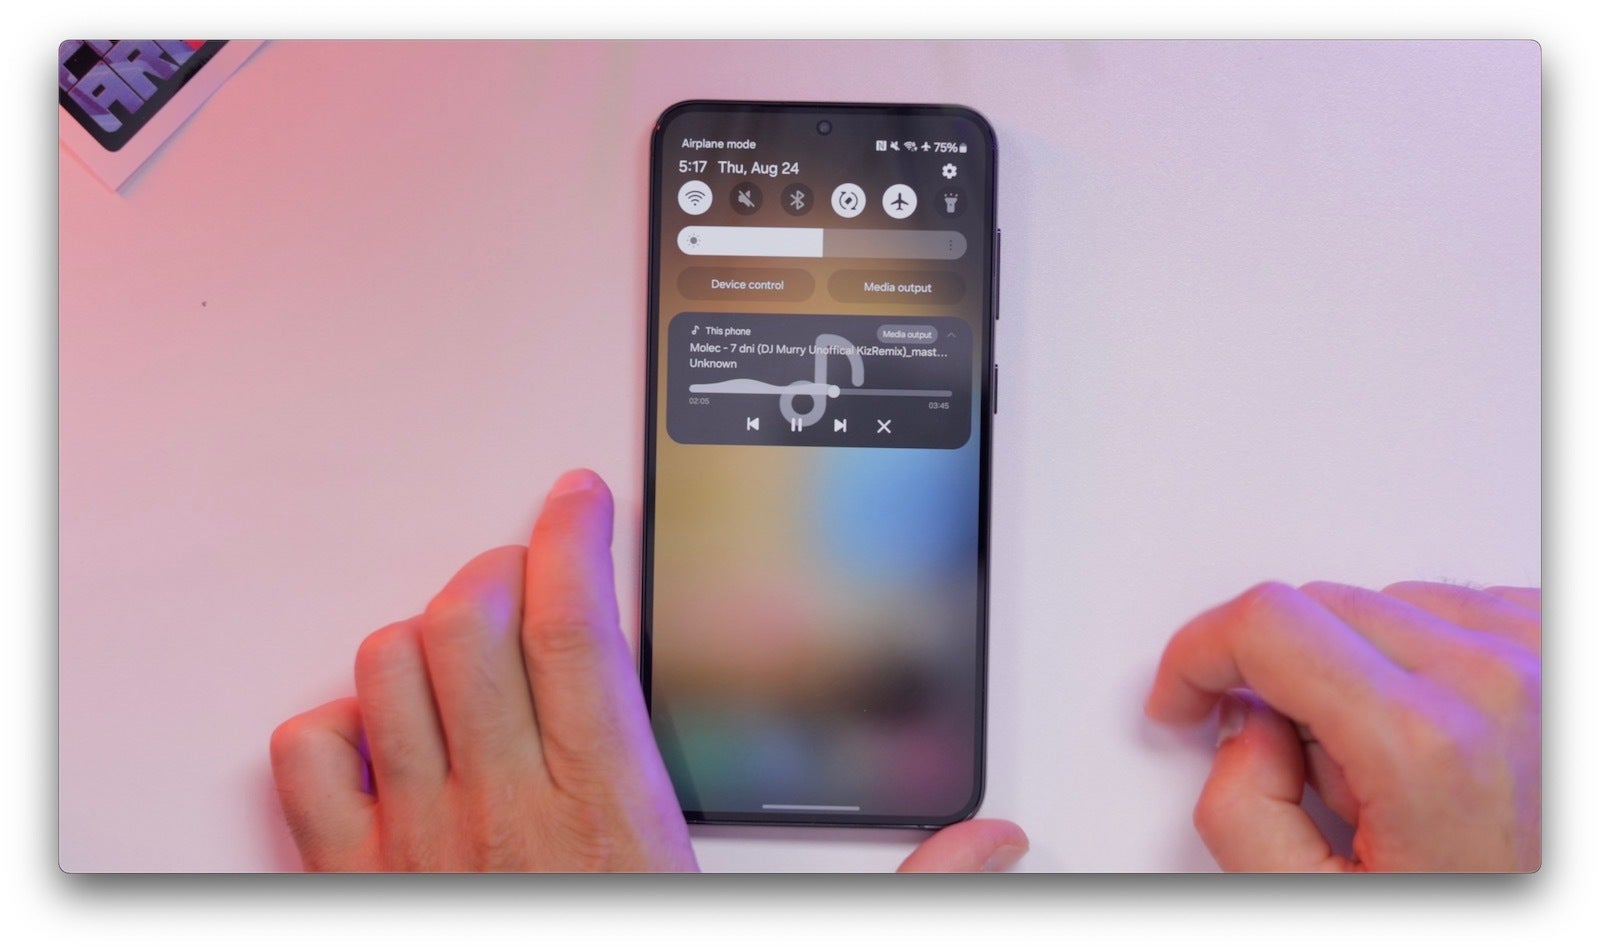 (Image Credit - PhoneArena) Neat little animation for now playing music - Samsung One UI 6.0: new features and everything you need to know